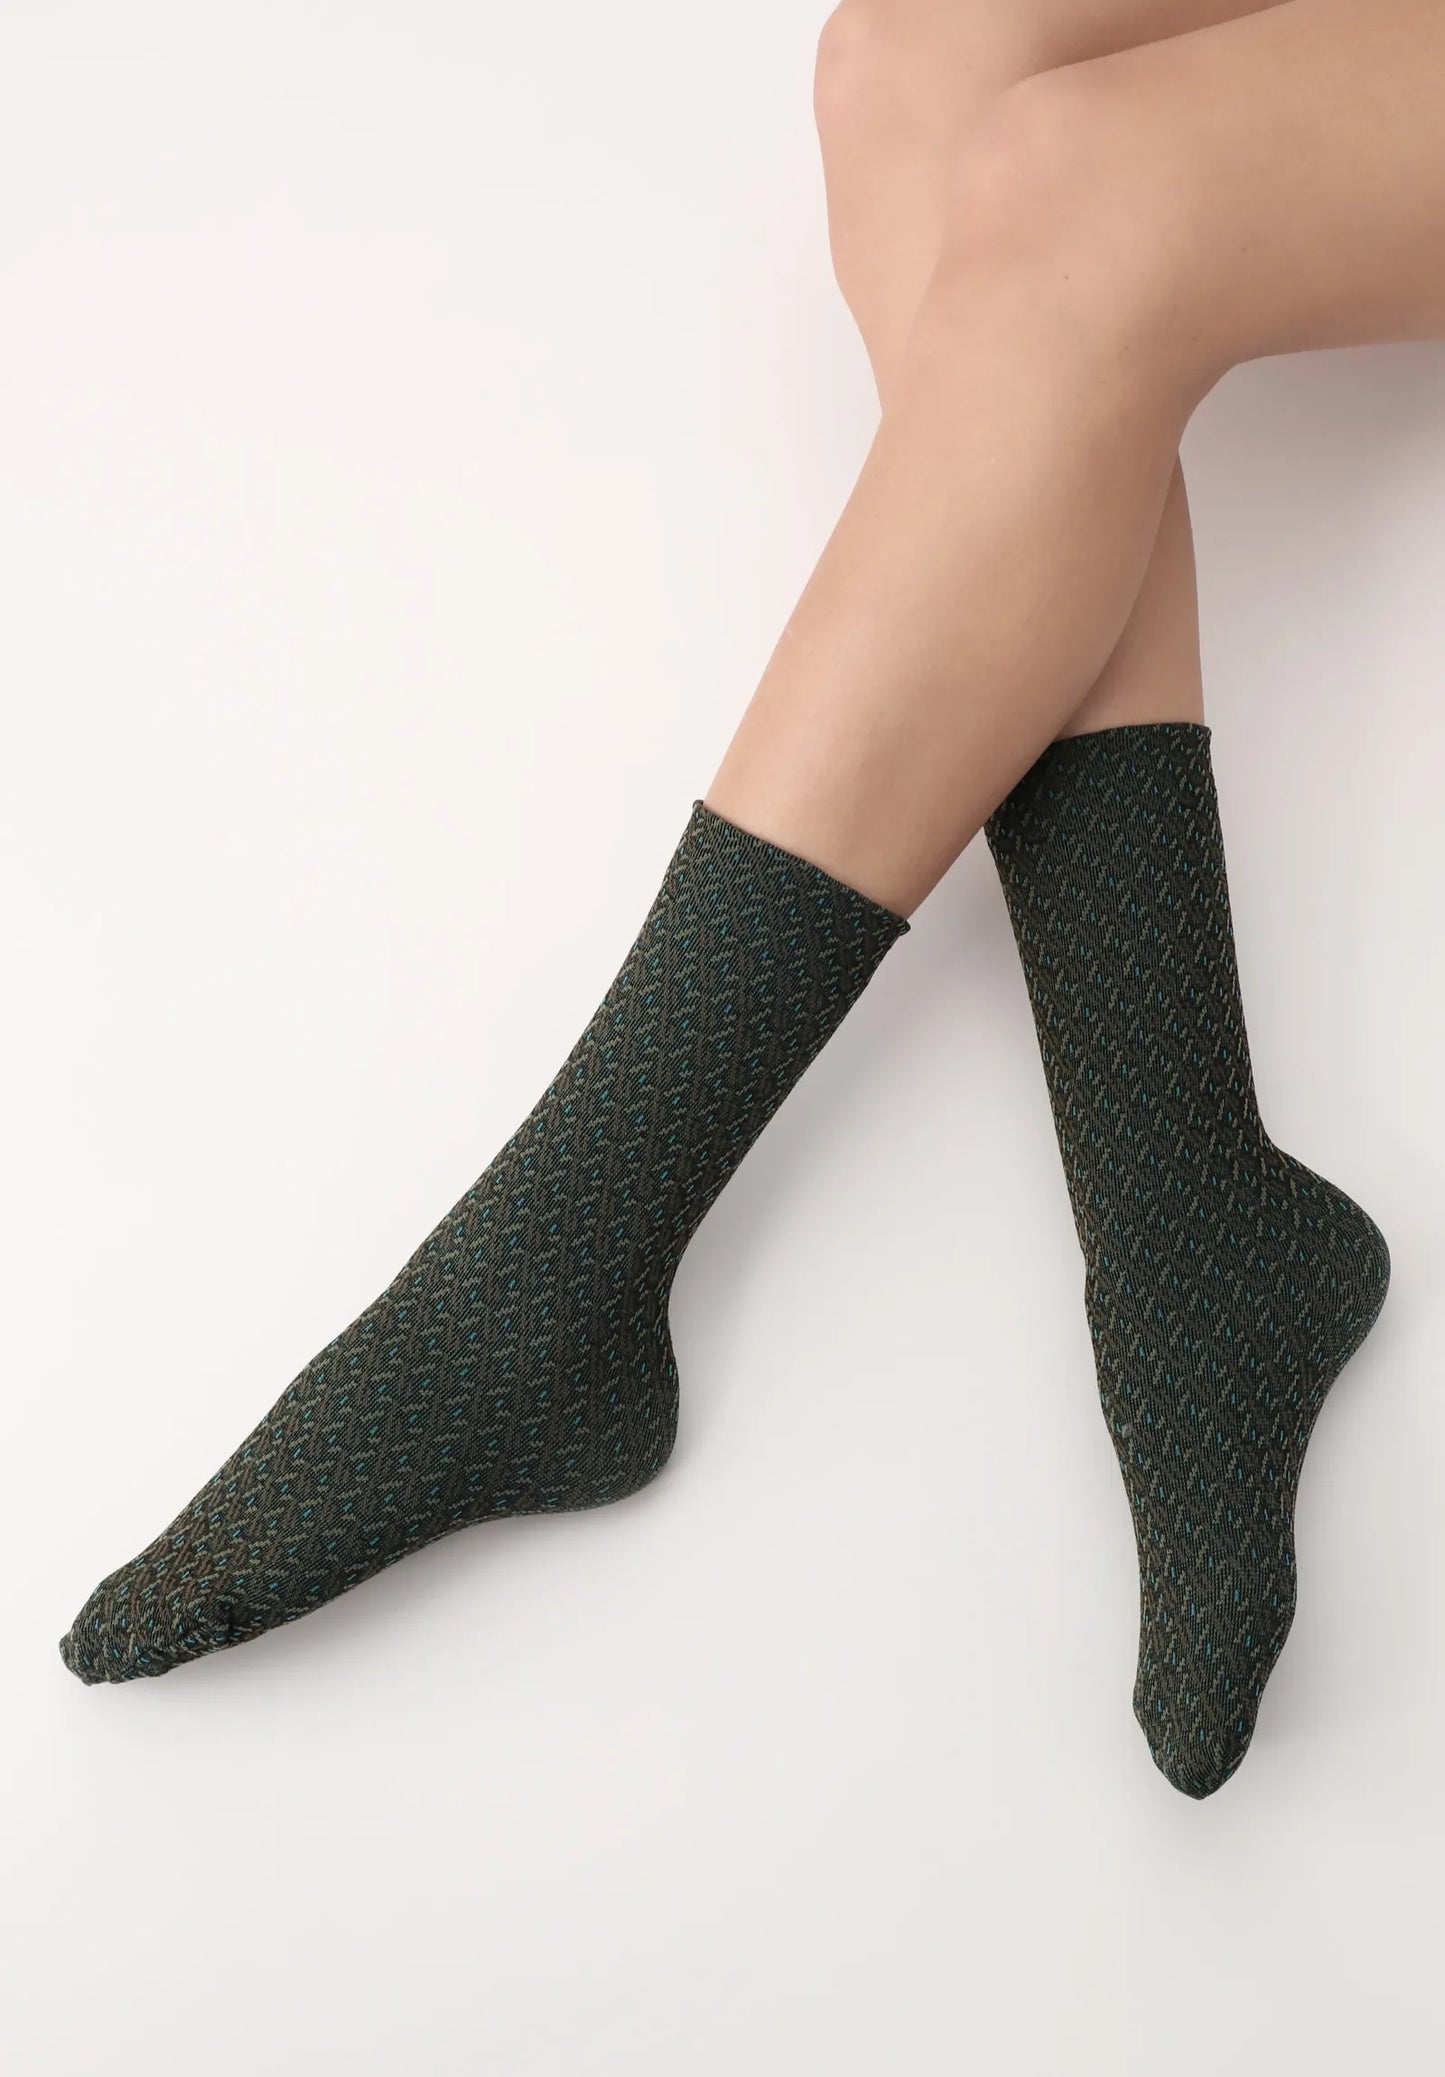 OroblÌ_ Jacquard Texture Sock - Soft opaque fashion ankle socks with a black background a jacquard style pattern of lines, dashes and specks in rust brown, khaki military green dark.